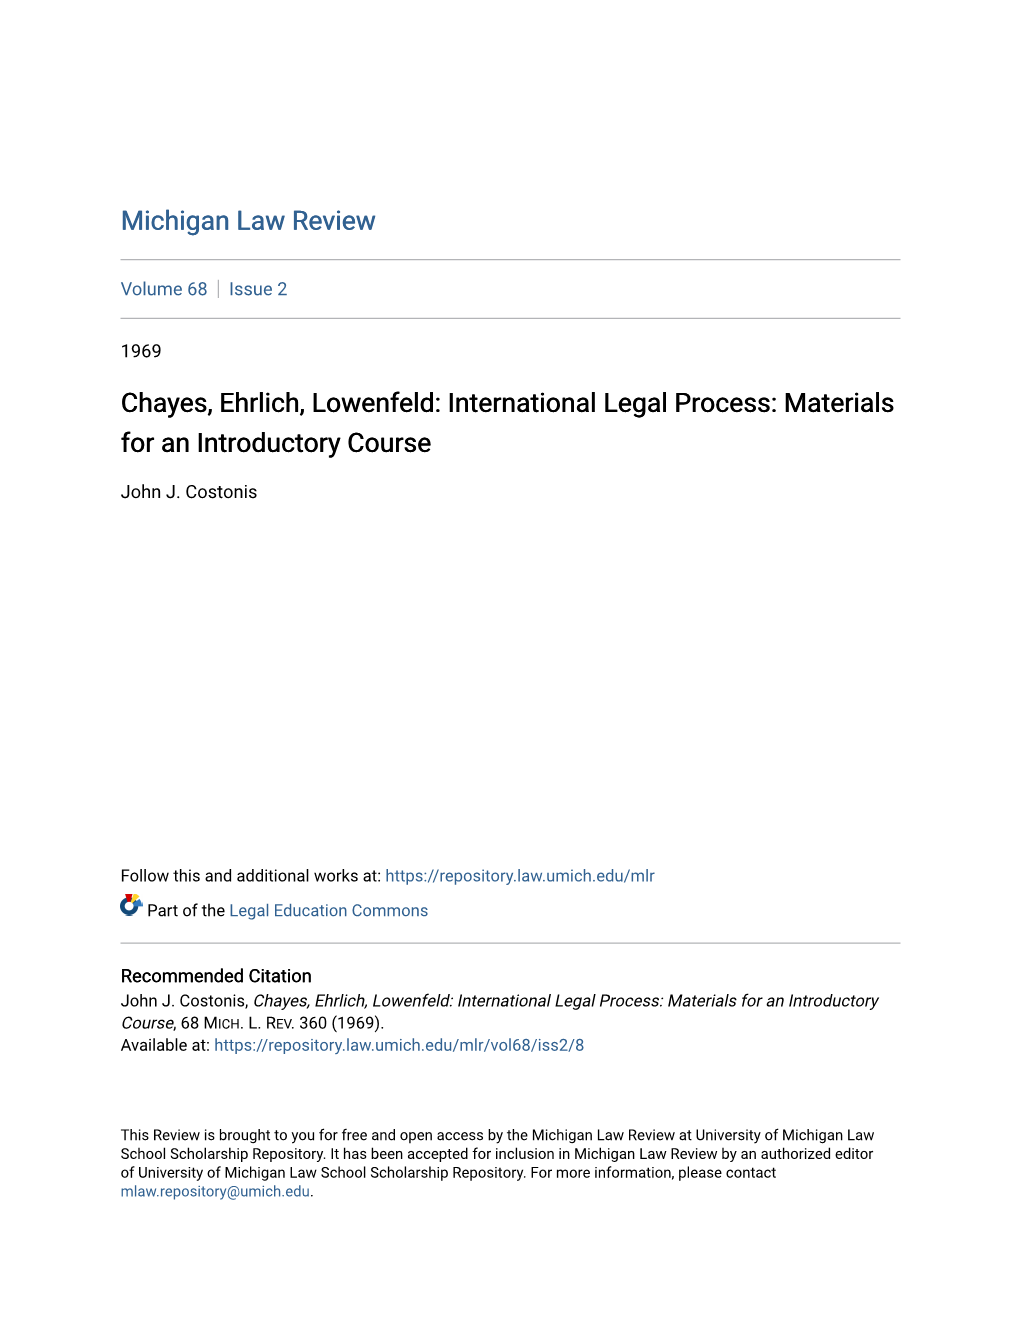 International Legal Process: Materials for an Introductory Course